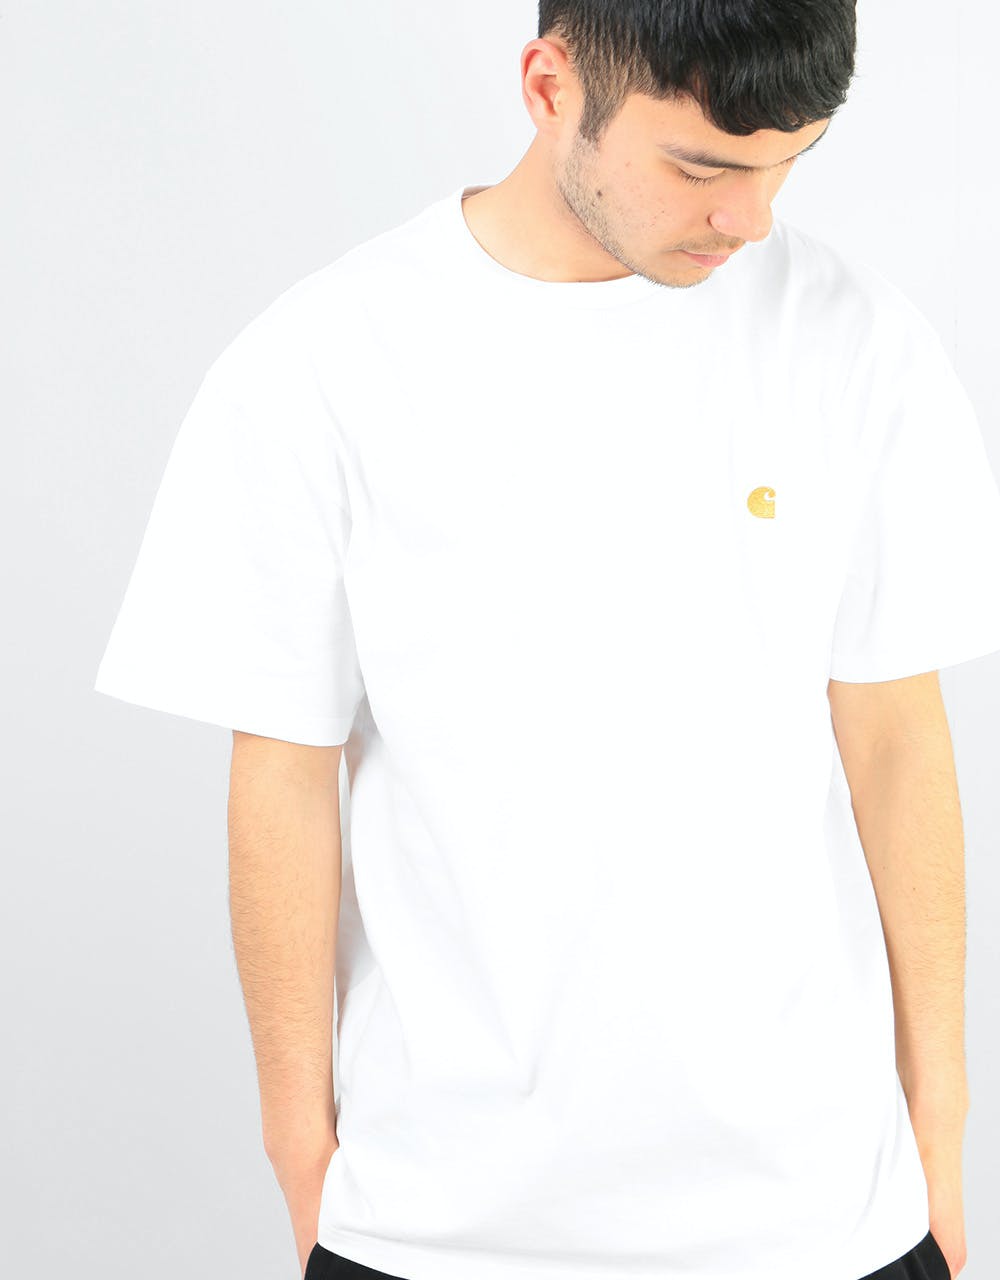 Carhartt WIP S/S Chase T-Shirt - White/Gold